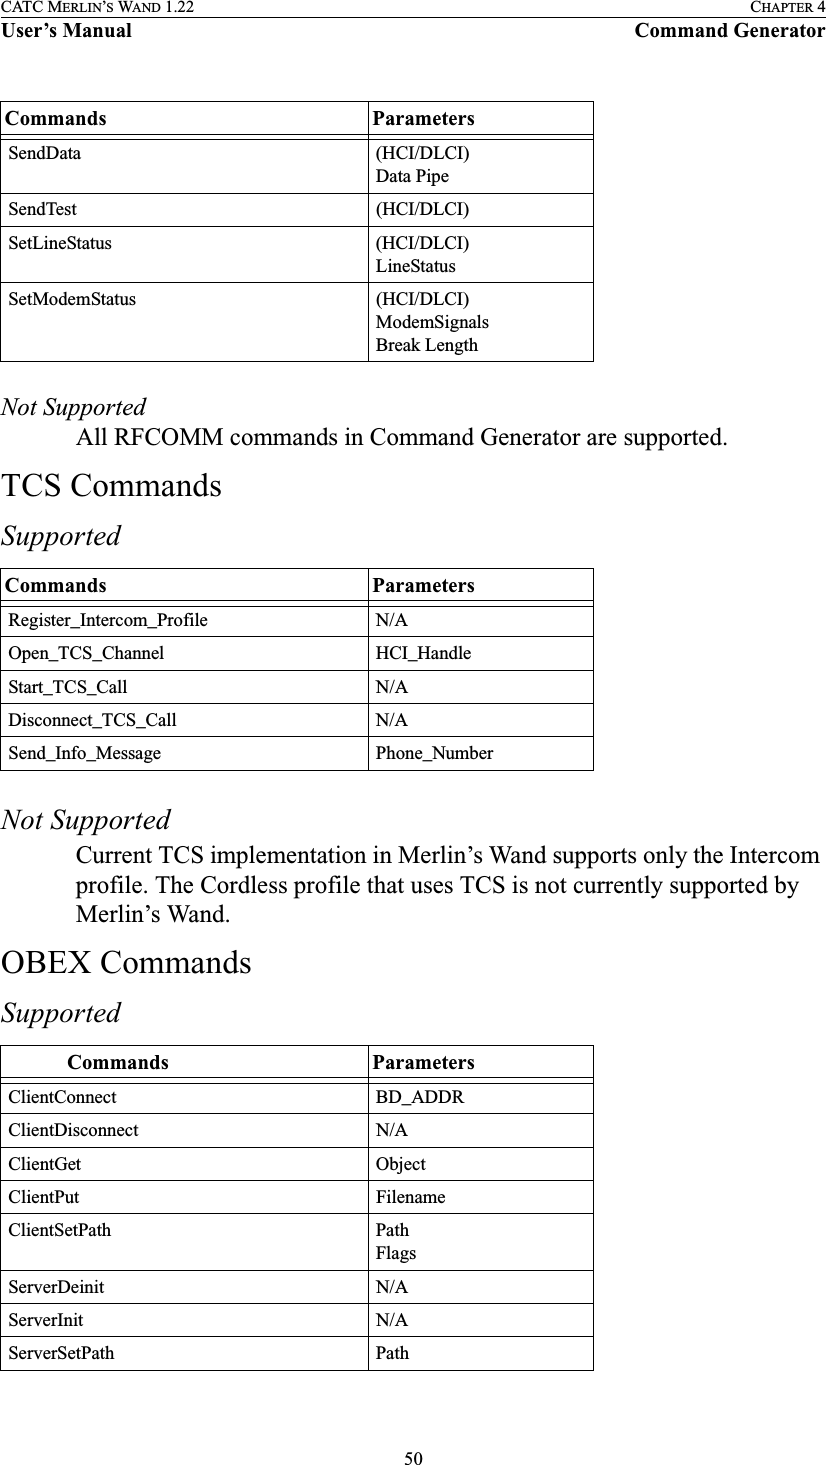 50CATC MERLIN’S WAND 1.22 CHAPTER 4User’s Manual Command GeneratorNot SupportedAll RFCOMM commands in Command Generator are supported.TCS CommandsSupportedNot SupportedCurrent TCS implementation in Merlin’s Wand supports only the Intercom profile. The Cordless profile that uses TCS is not currently supported by Merlin’s Wand.OBEX CommandsSupportedSendData (HCI/DLCI)Data PipeSendTest (HCI/DLCI)SetLineStatus (HCI/DLCI)LineStatusSetModemStatus (HCI/DLCI)ModemSignalsBreak LengthCommands ParametersRegister_Intercom_Profile N/AOpen_TCS_Channel HCI_HandleStart_TCS_Call N/ADisconnect_TCS_Call N/ASend_Info_Message Phone_Number            Commands ParametersClientConnect BD_ADDRClientDisconnect N/AClientGet ObjectClientPut FilenameClientSetPath PathFlagsServerDeinit N/AServerInit N/AServerSetPath PathCommands Parameters